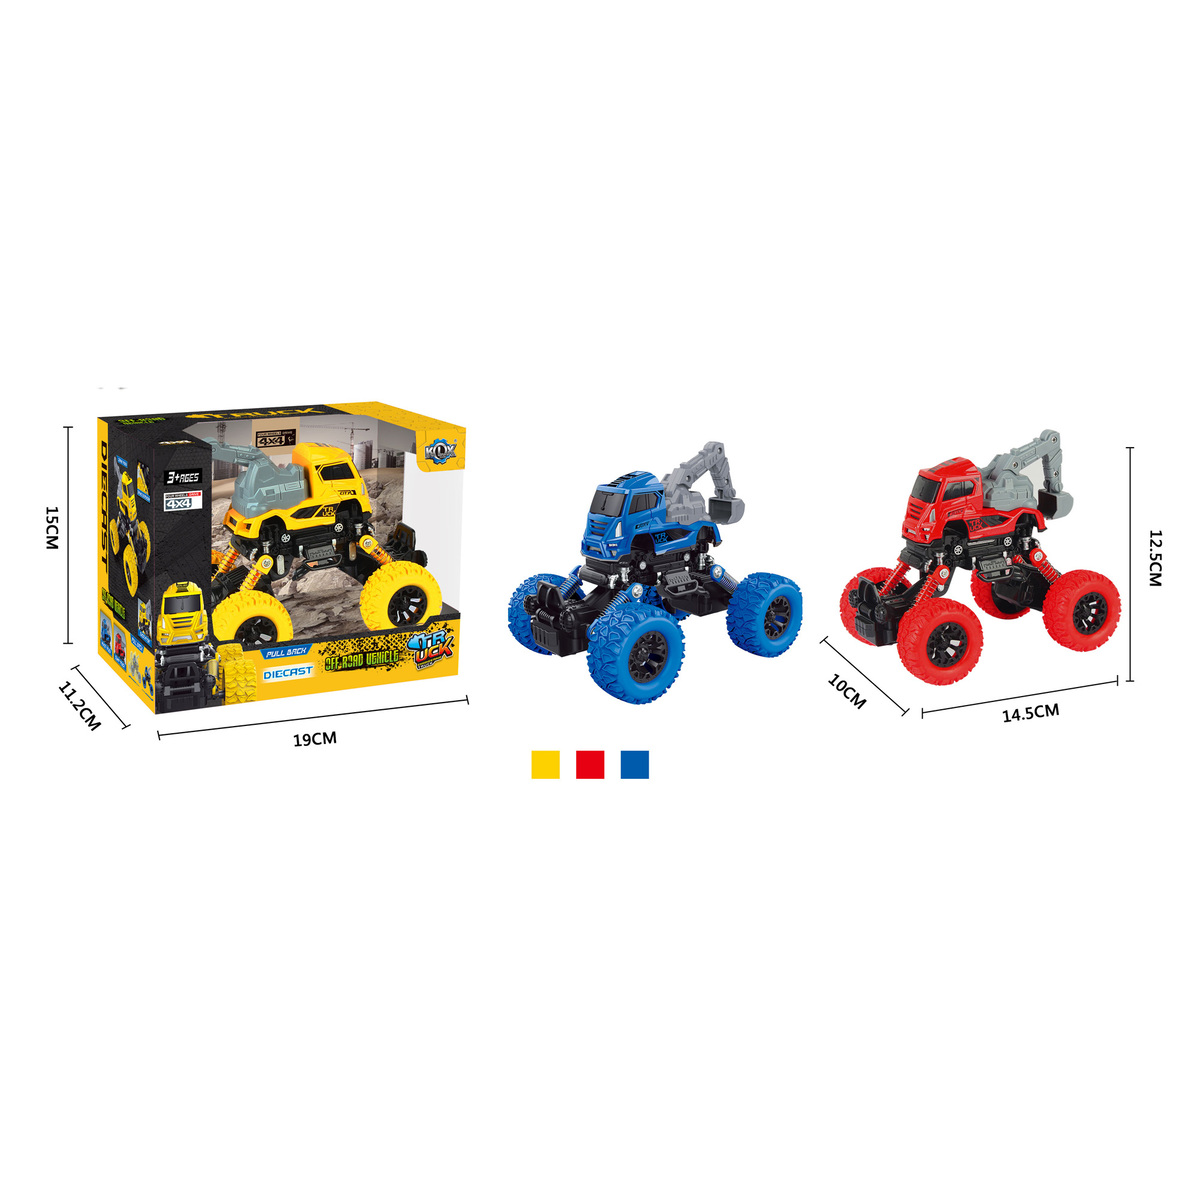 Skid Fusion Alloy Climbing Truck KLX600-102  Assorted Color